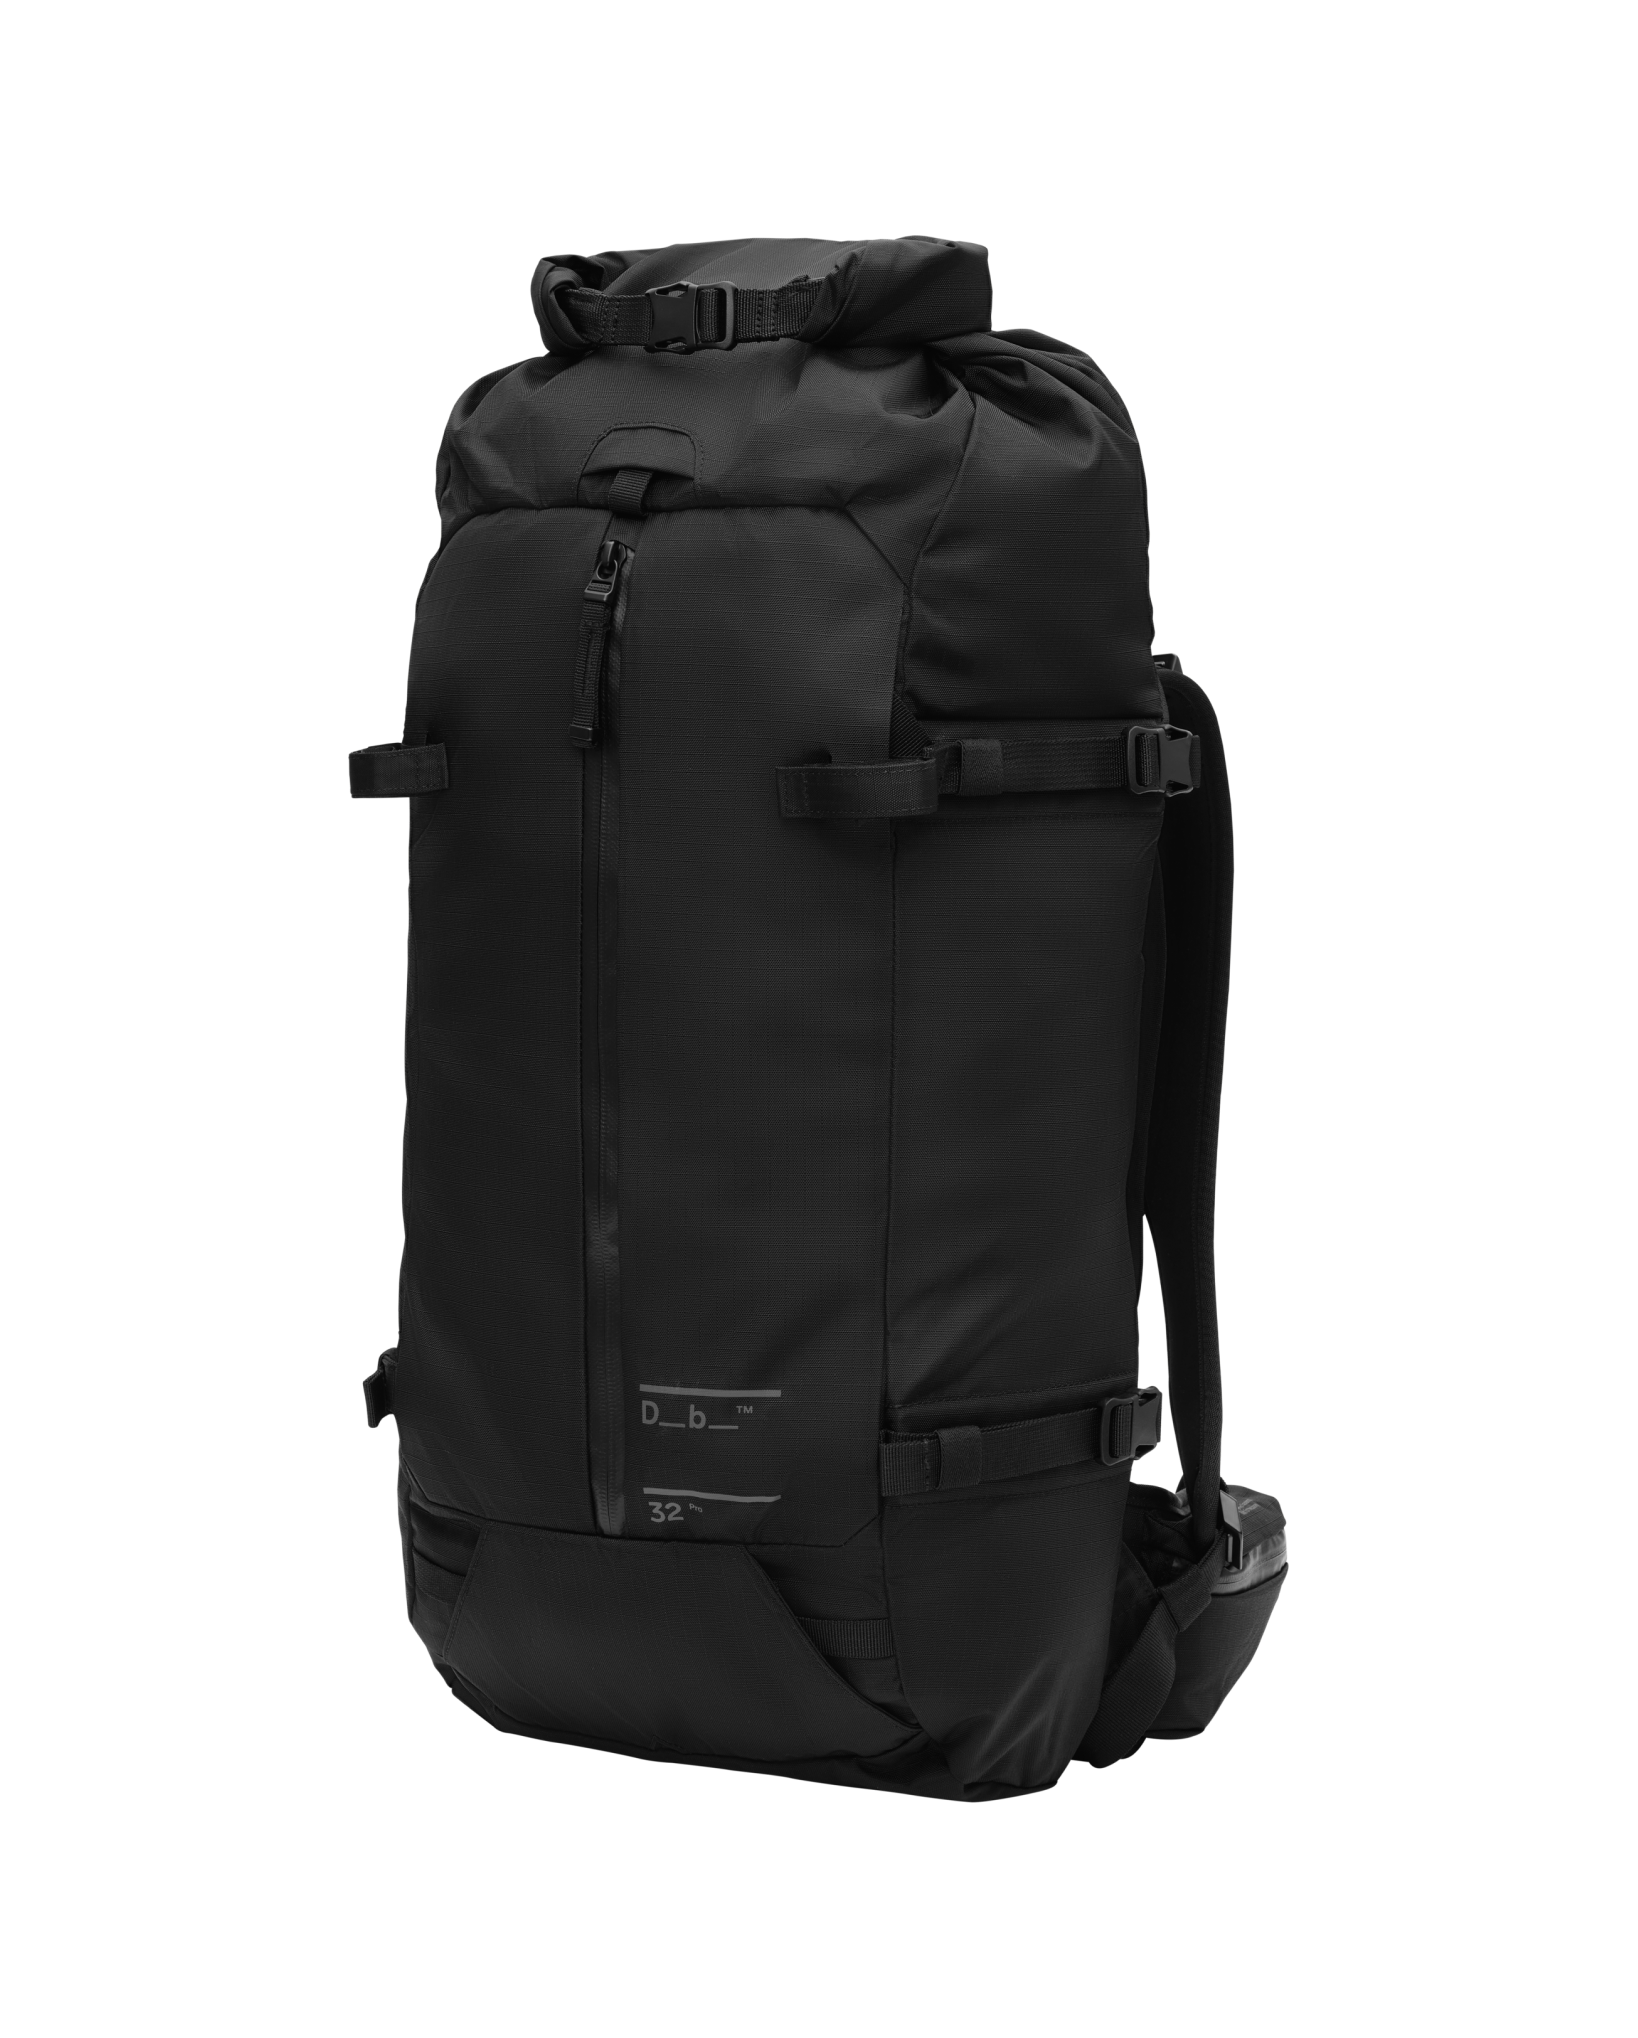 Snow Pro Backpack L Black Out